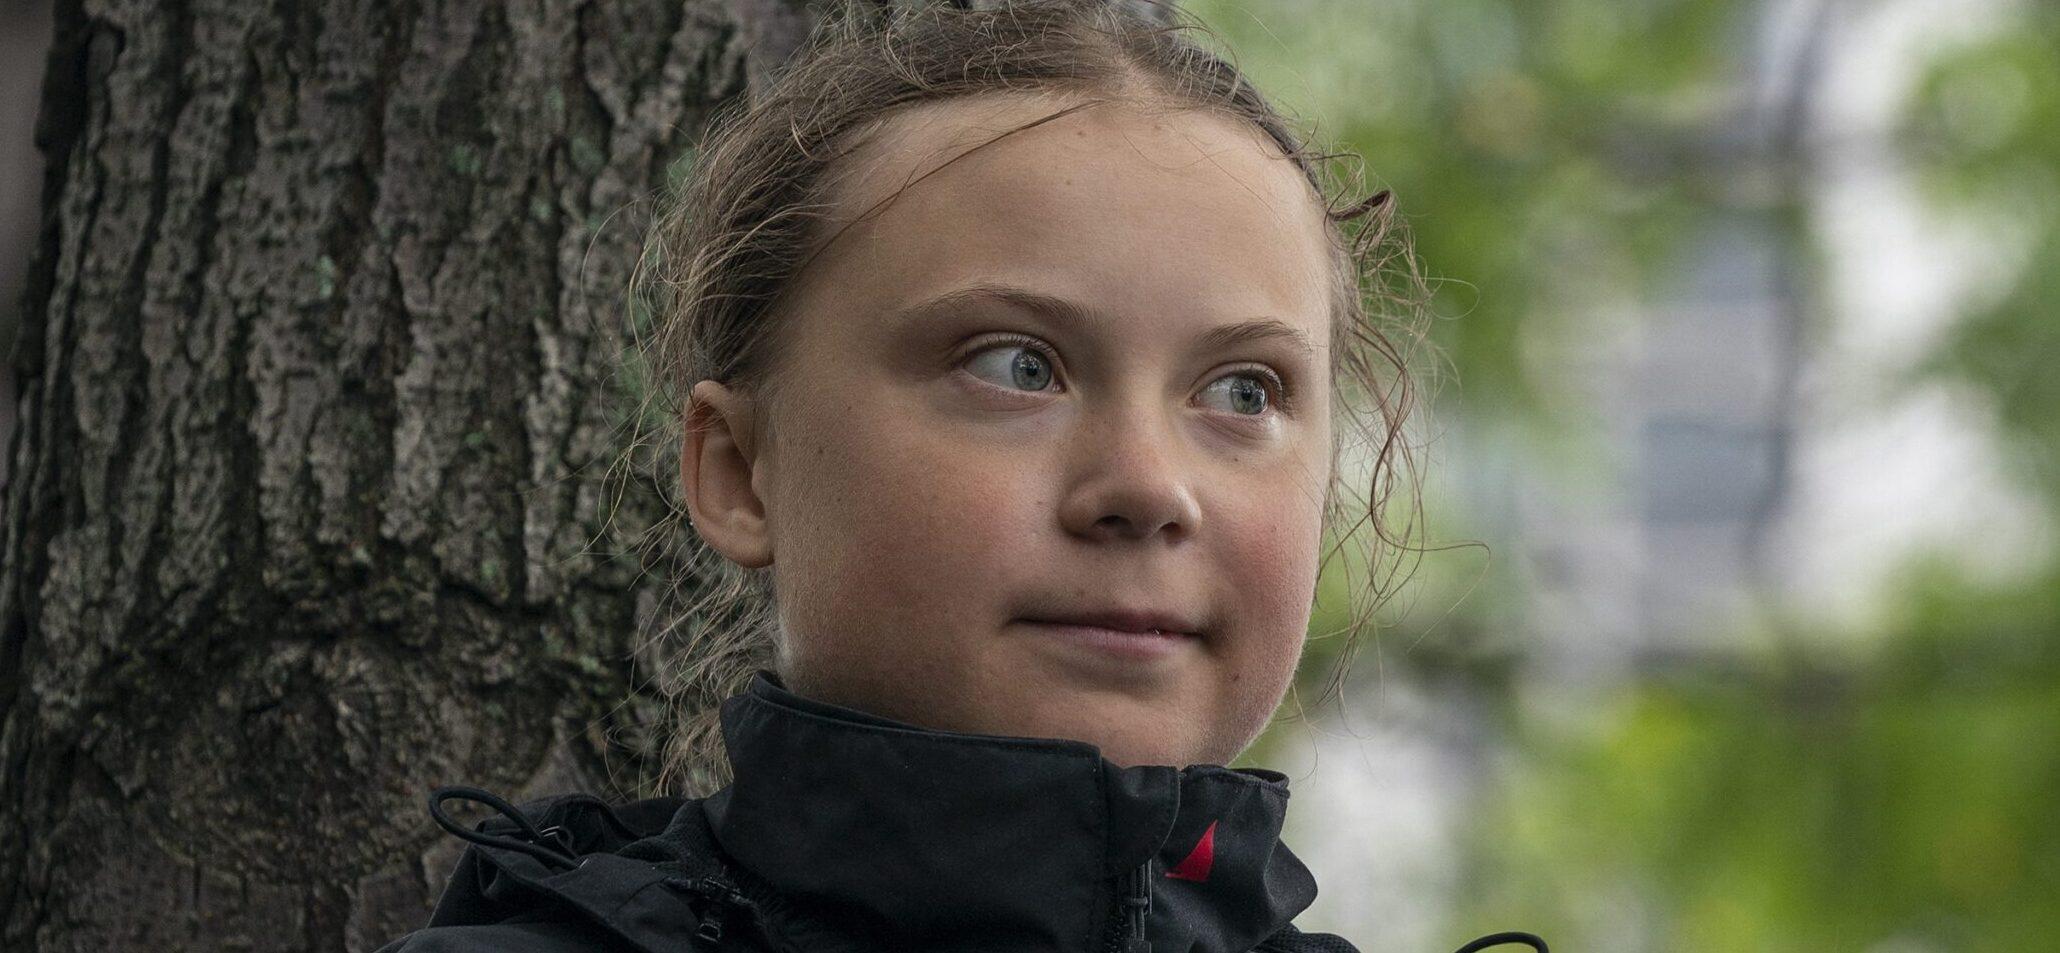 Greta Thunberg UNFAZED During Arrest Following Oil Protest In London